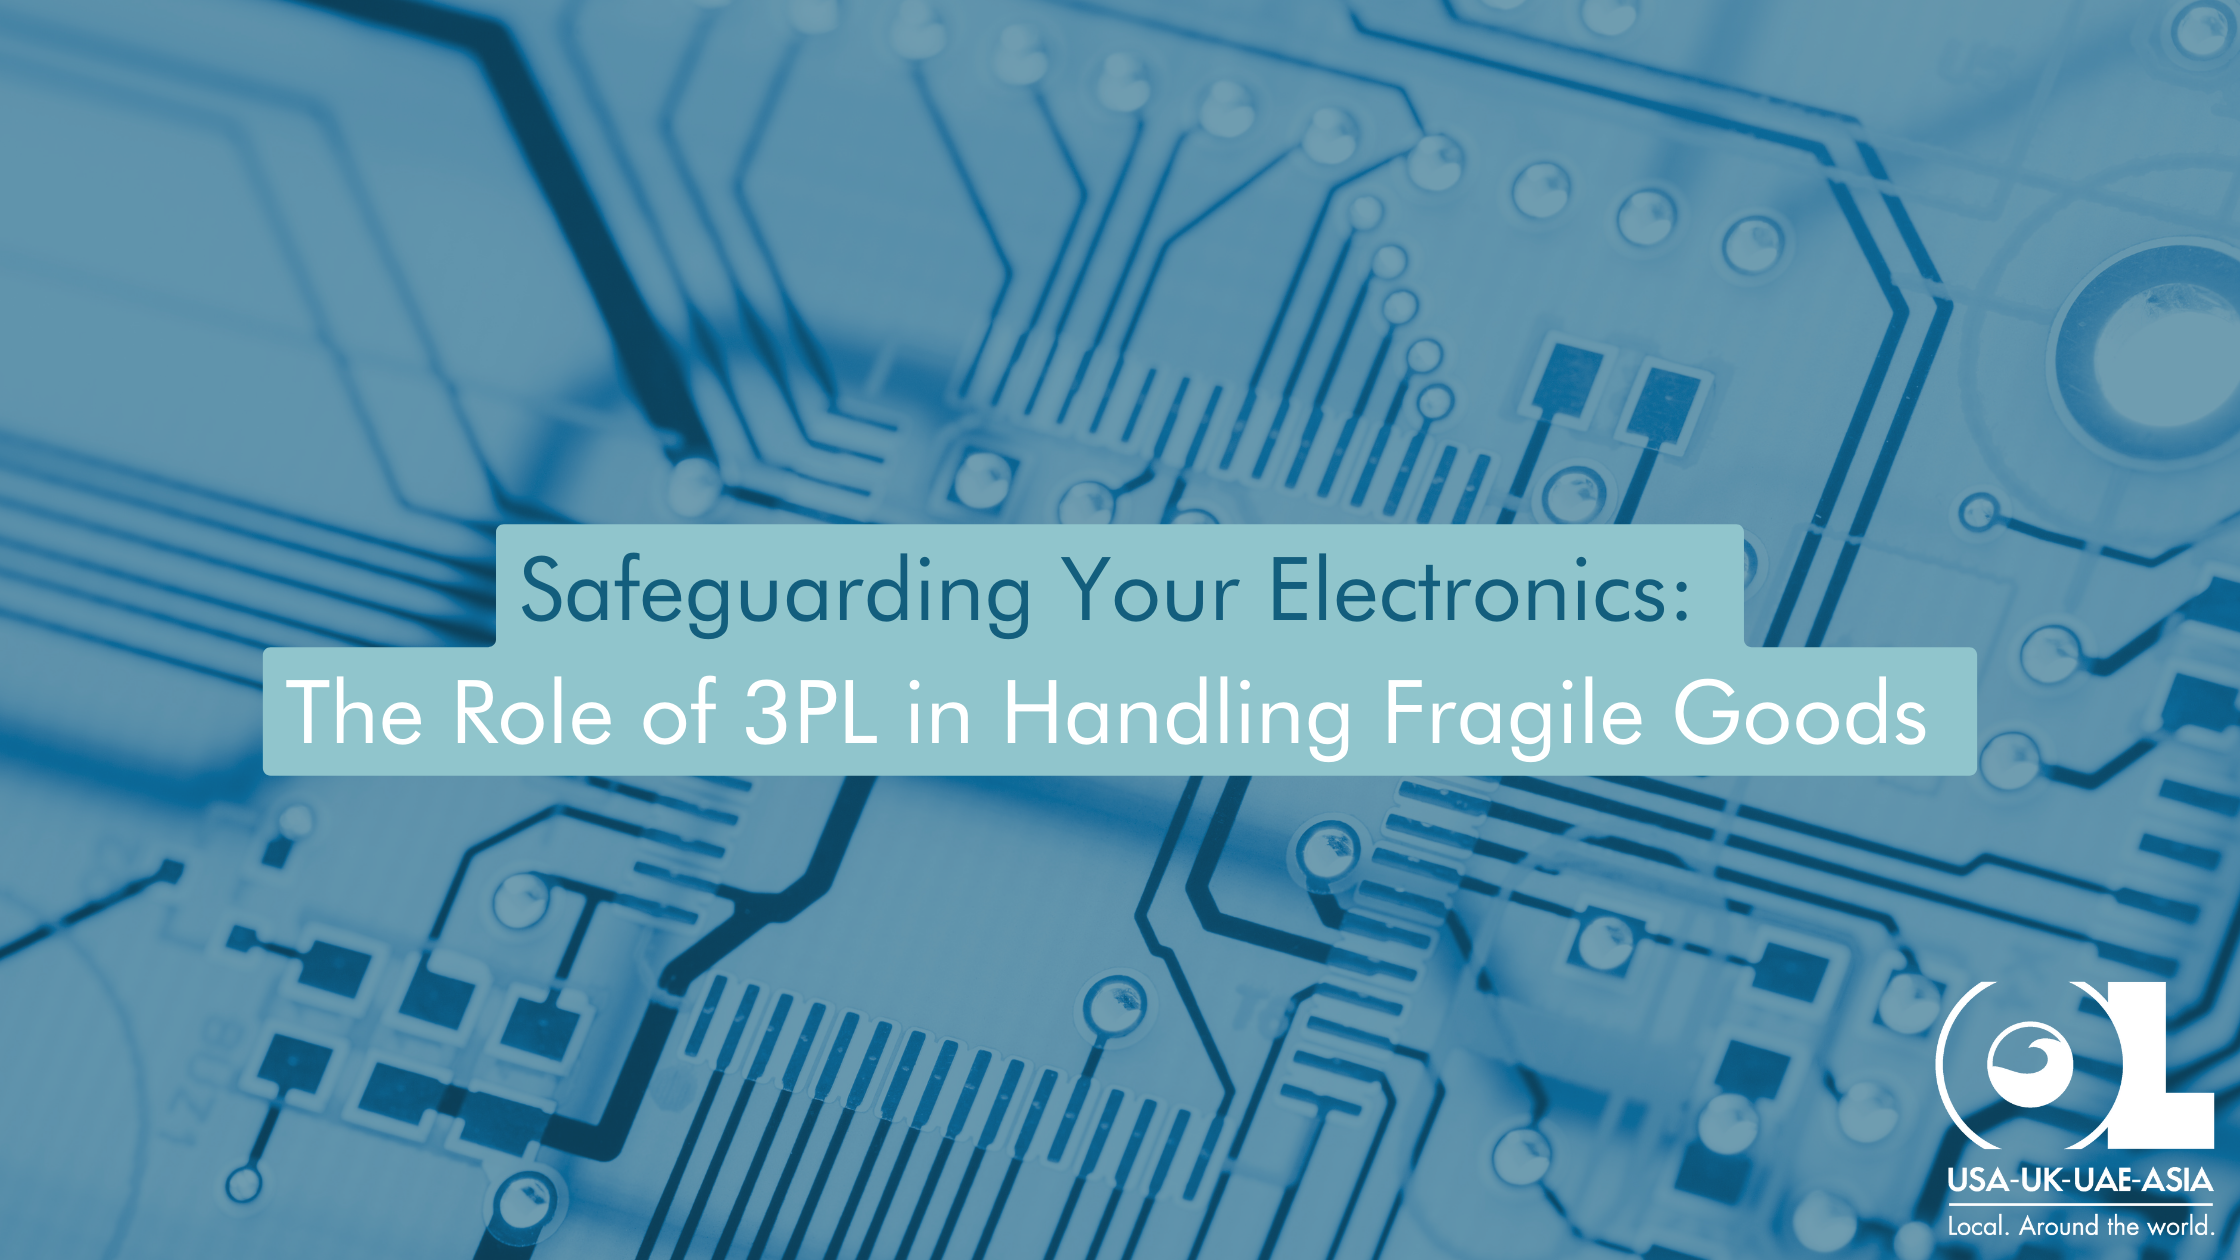 Safeguarding-Your-Electronics-The-Role-of-3PL-in-Handling-Fragile-Goods-OL-USA